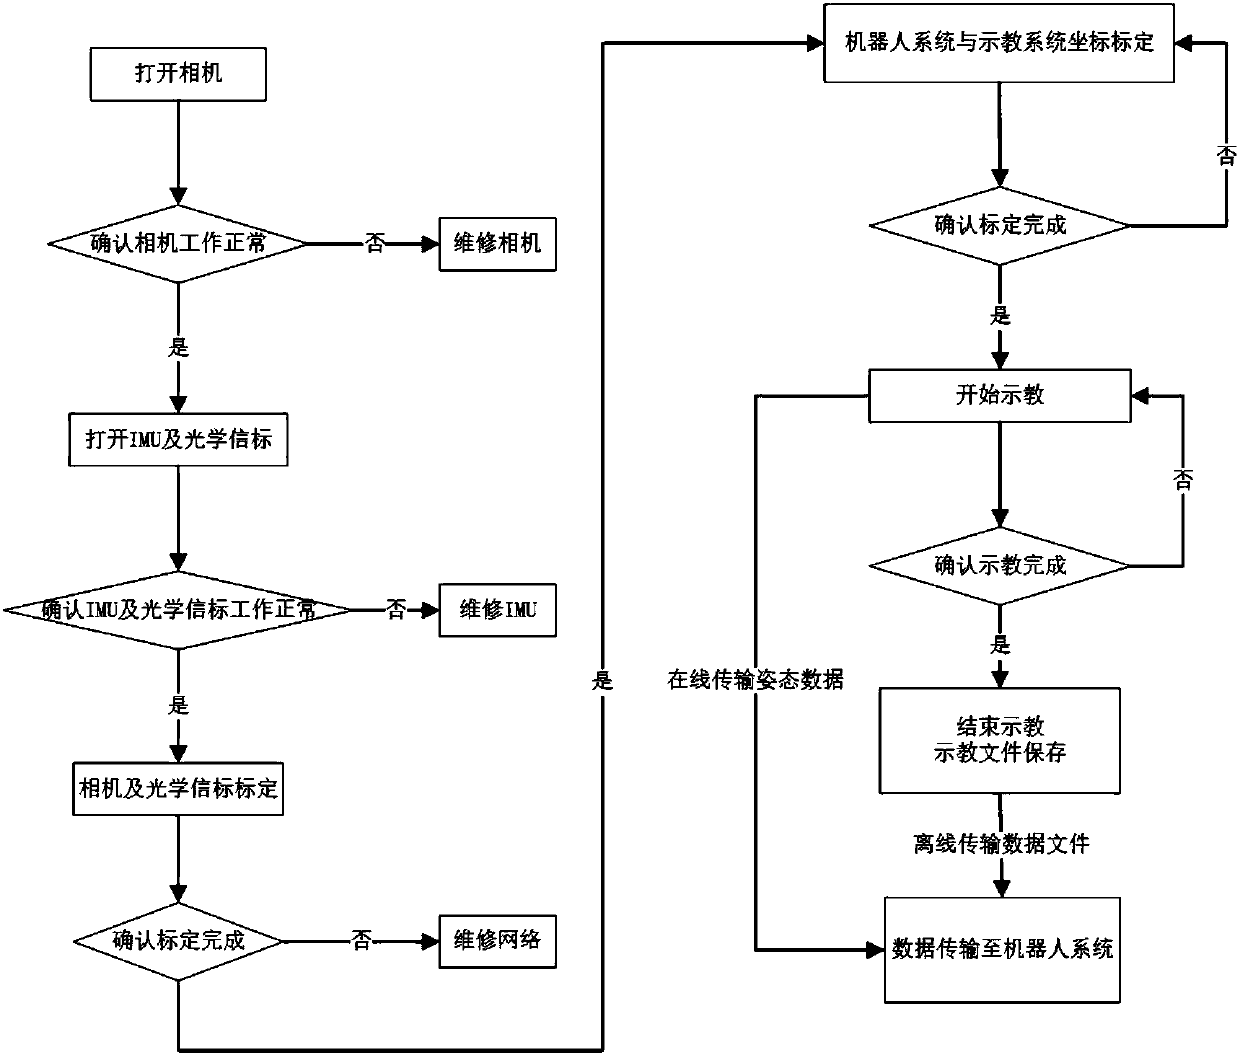 Robot teaching recording system, teaching process steps and algorithm flow of robot teaching recording system